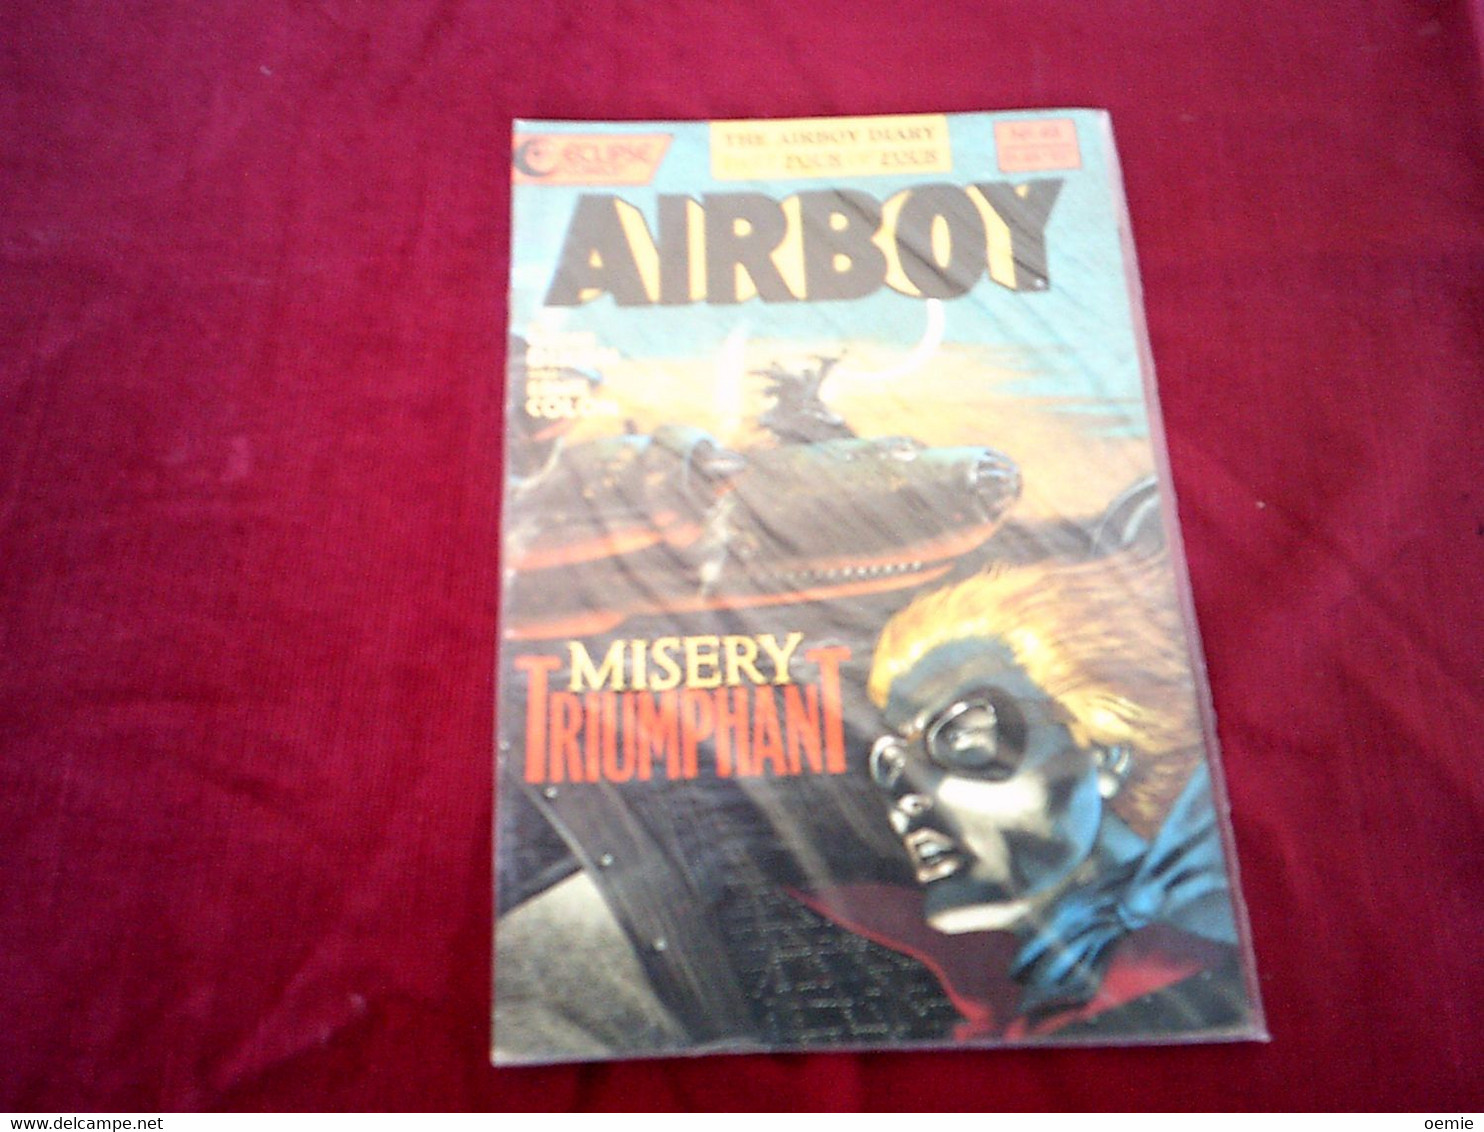 AIRBOY   N° 49   MISERY  TRIUMPHANT - Other Publishers